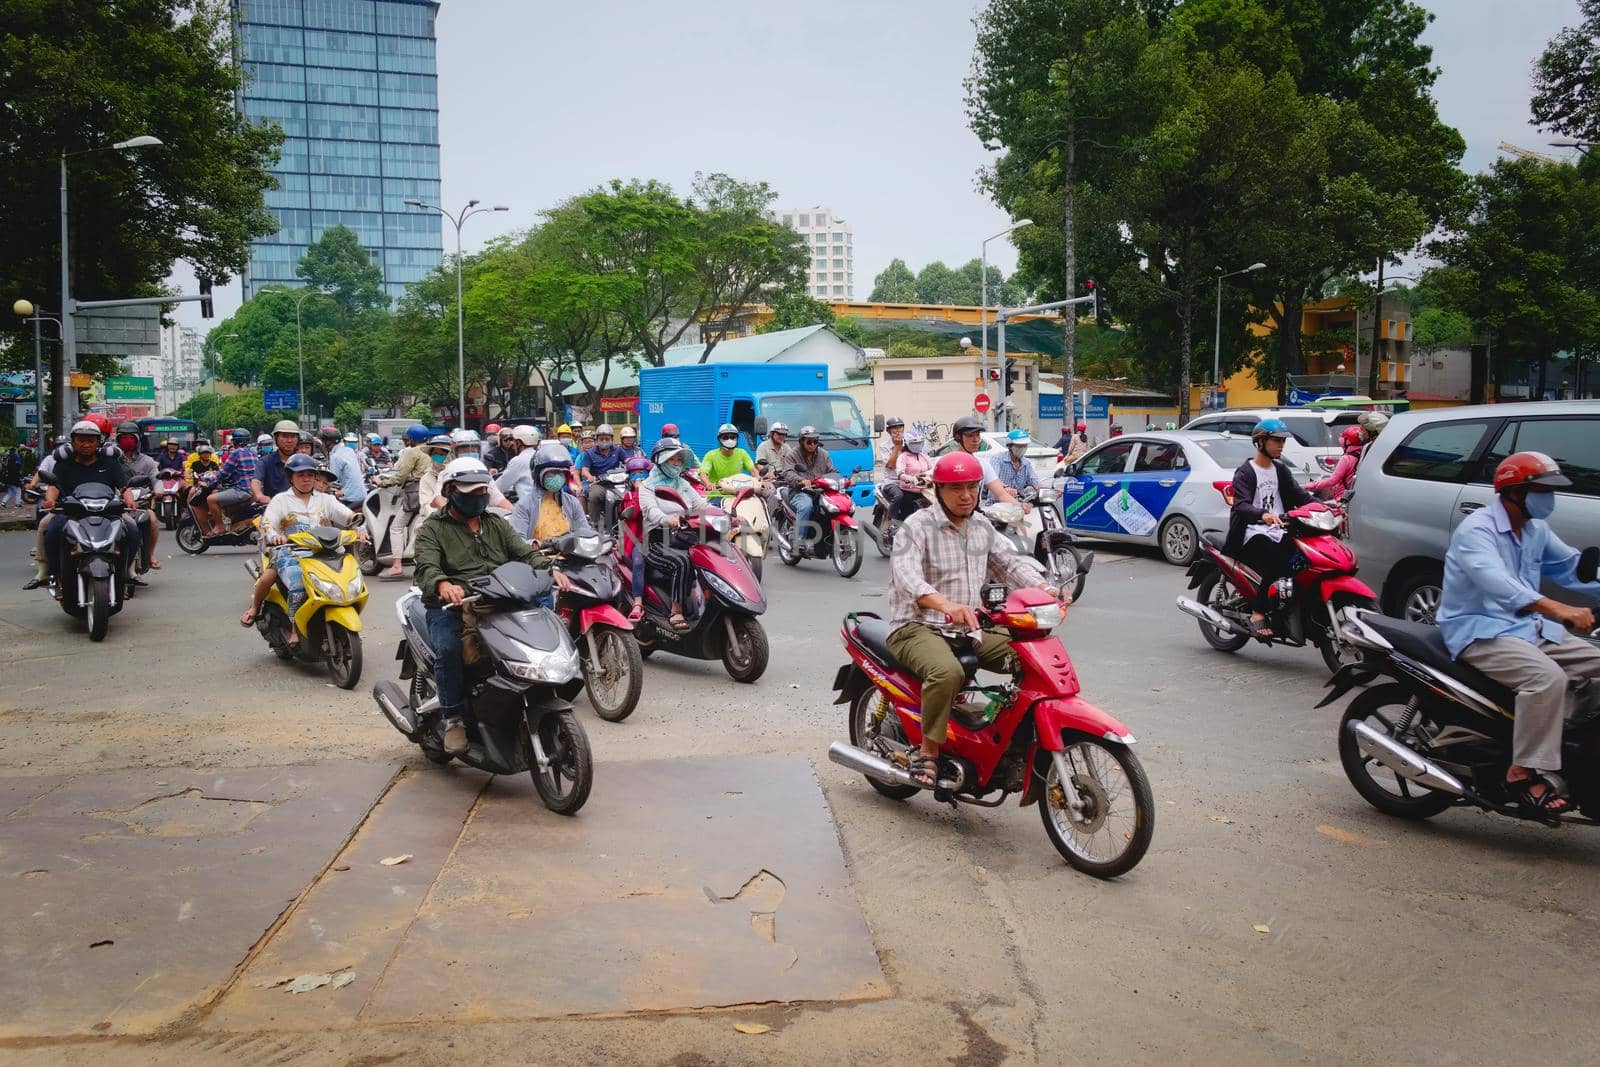 2019-11-10 / Ho Chi Minh City, Vietnam - Urban scene in rush hour. Motorcycles flood the chaotic traffic flow of the city.